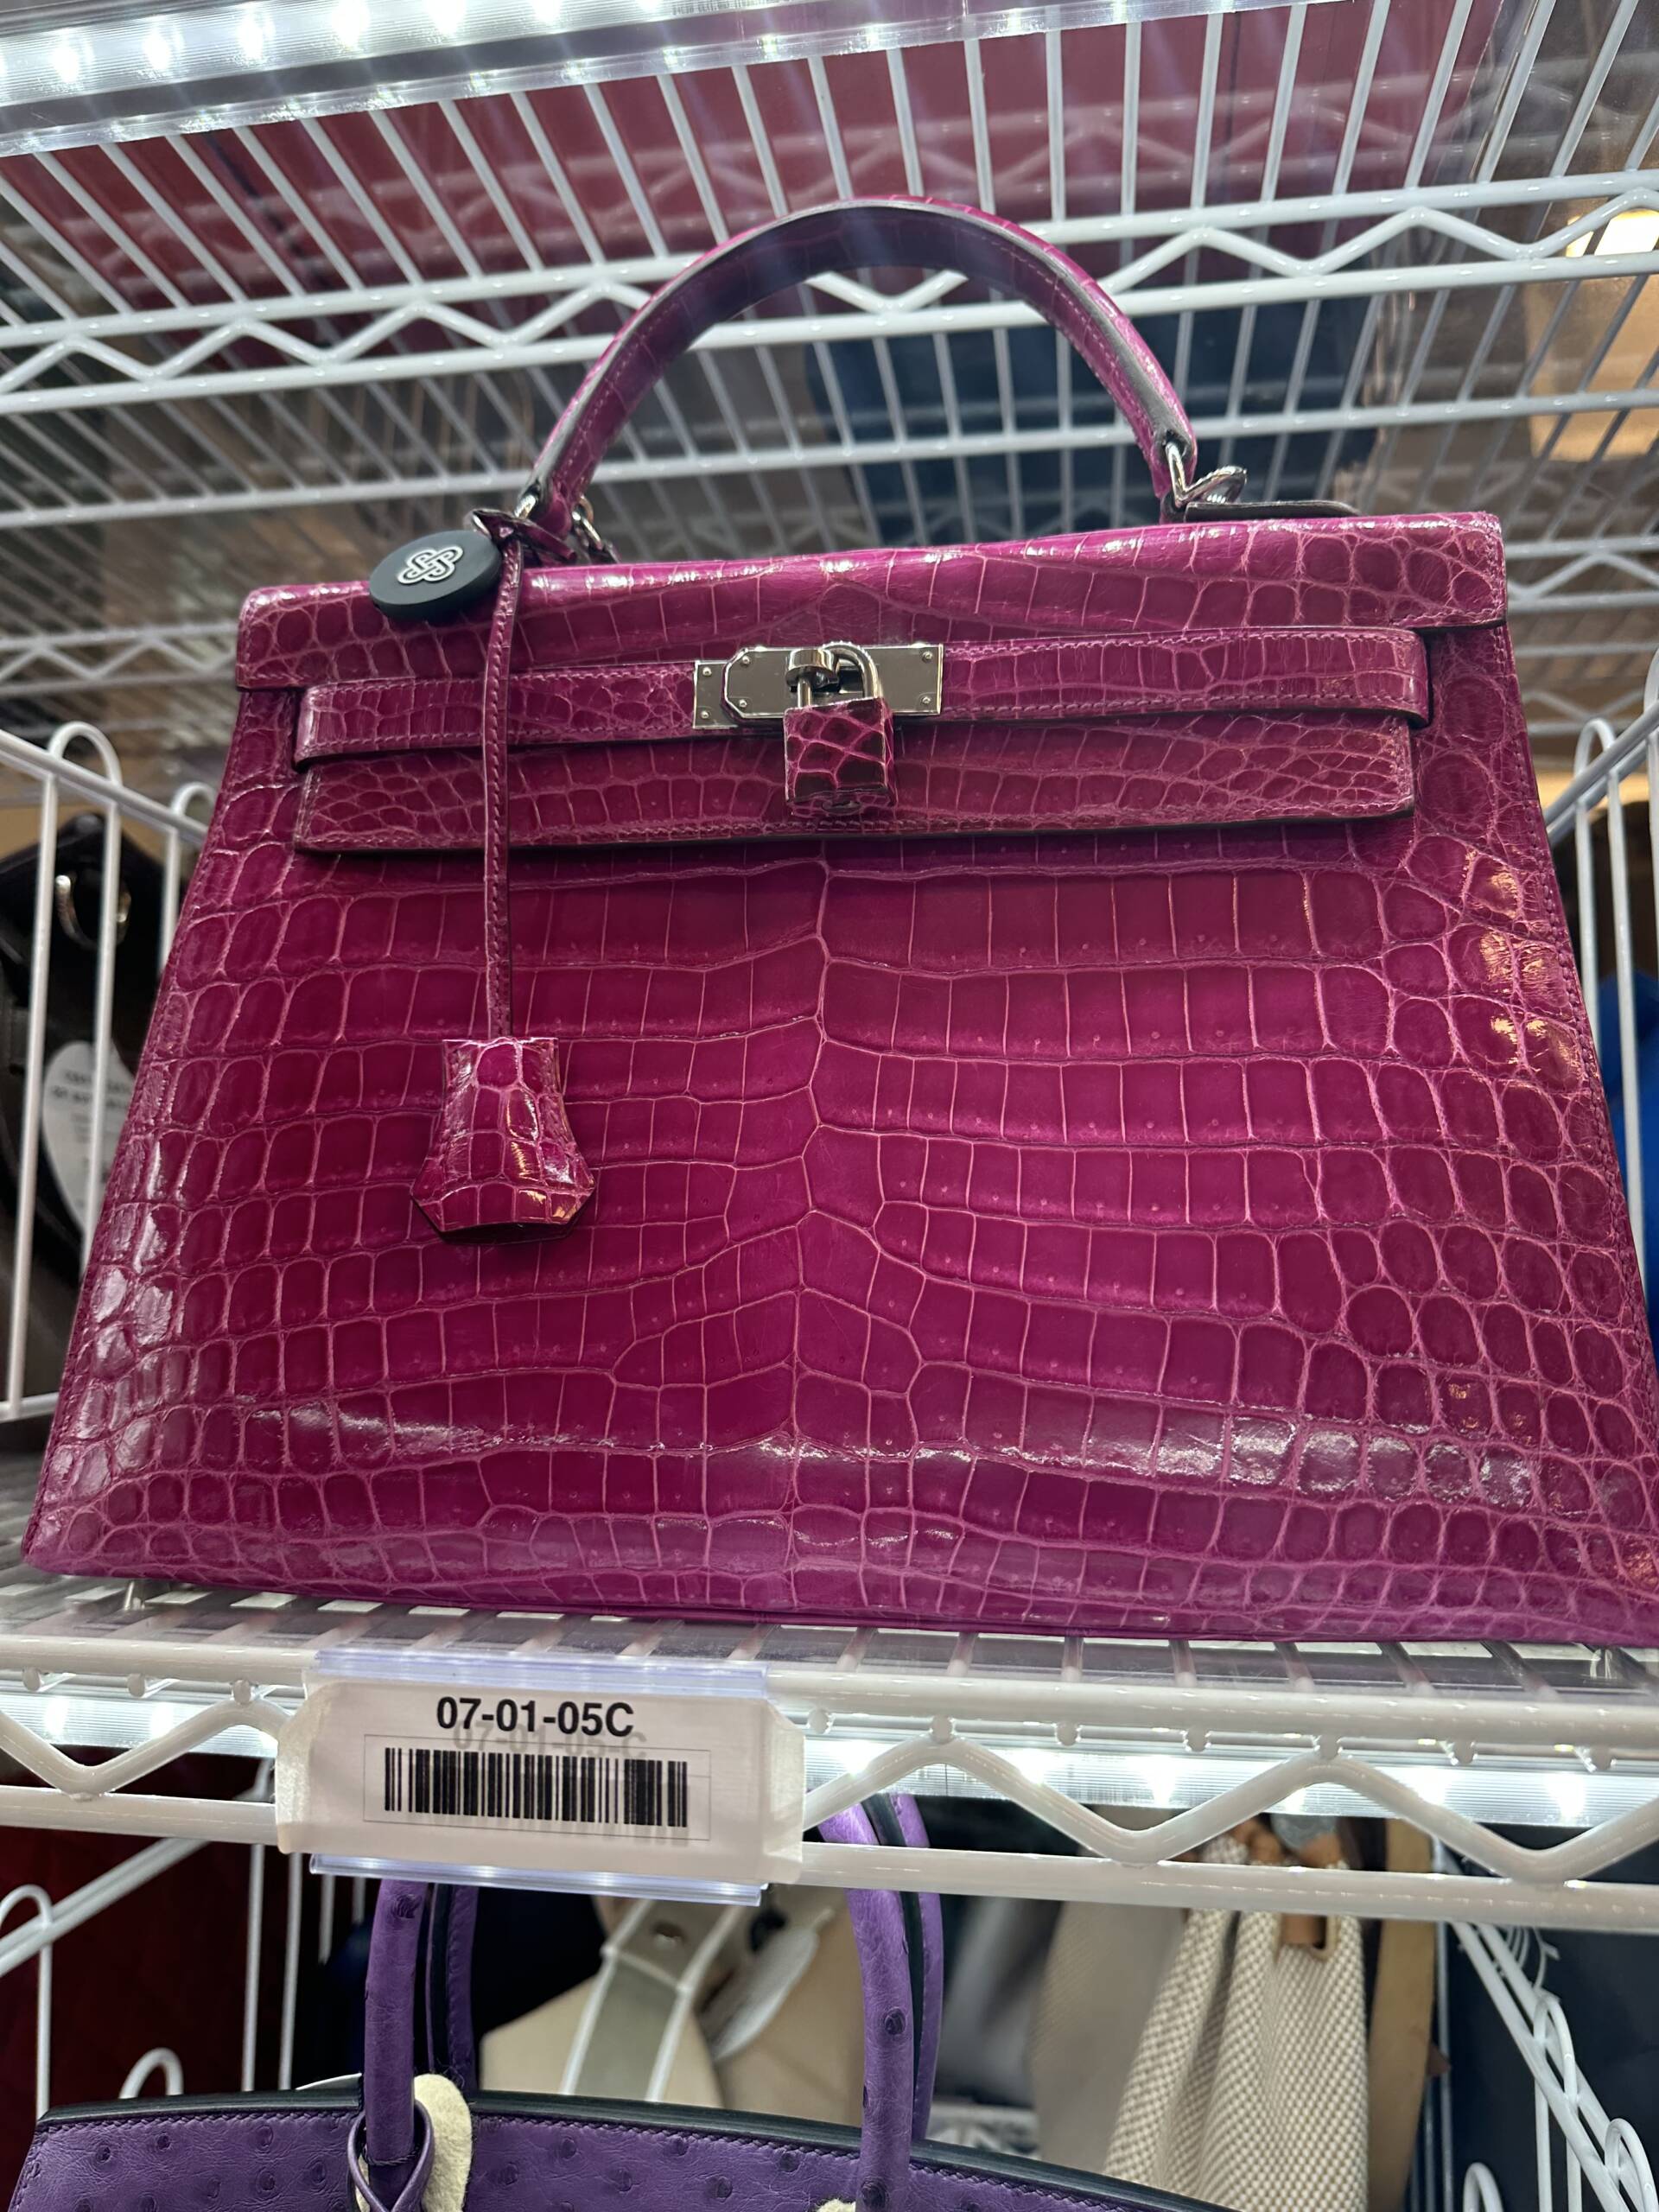 Fashionphile Luxe Love Event | Pink luxury handbags | hermes croc kelly